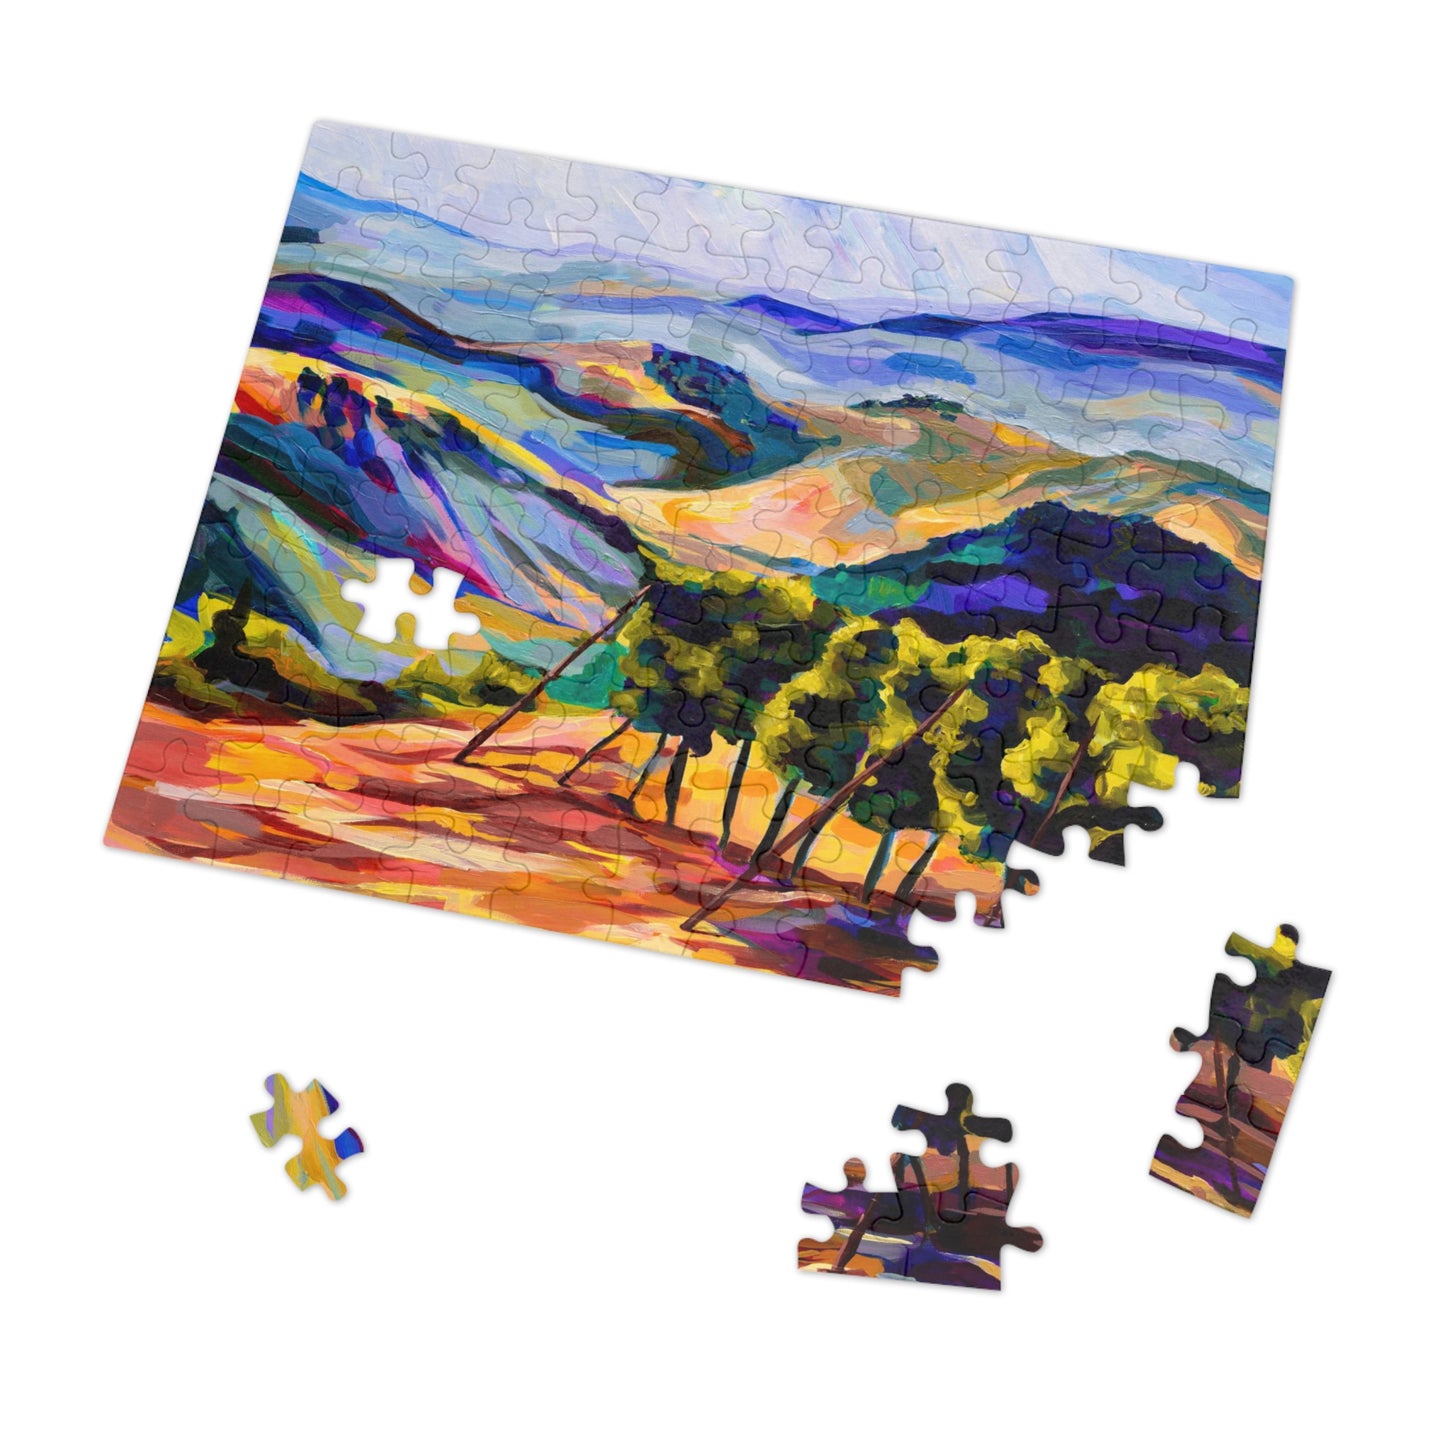 “Mountaintop Vineyard Outside Jerusalem” Painting by Leah Luria Jigsaw Puzzle (30, 110, 252, 500,1000-Piece)